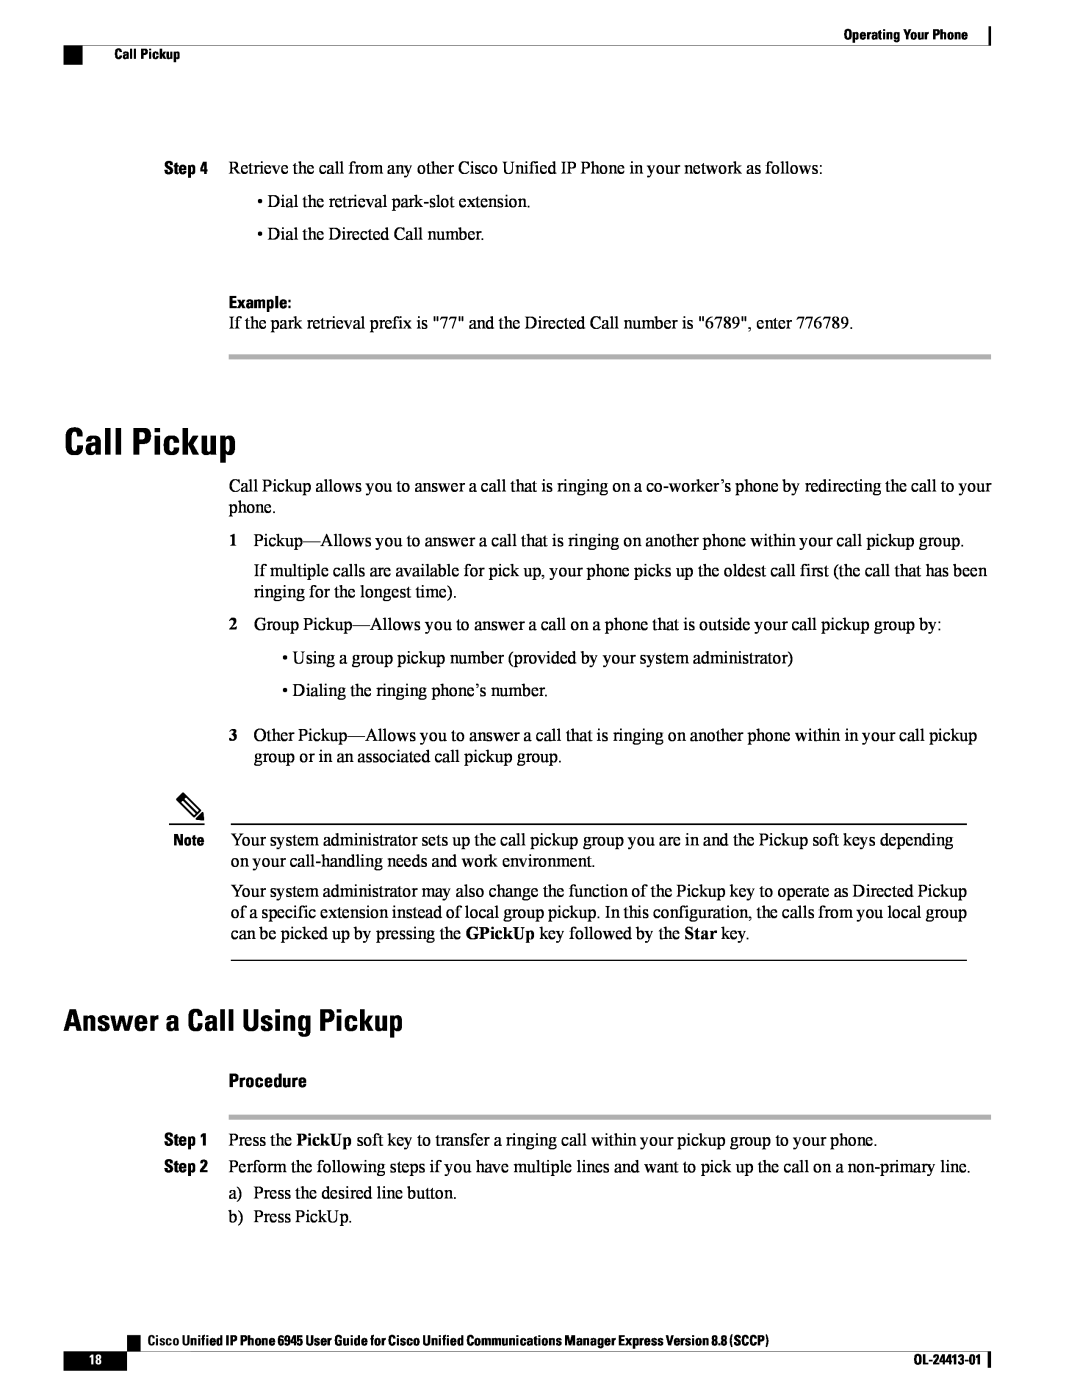 Cisco Systems 6945 manual Call Pickup, Answer a Call Using Pickup, Procedure, Example 